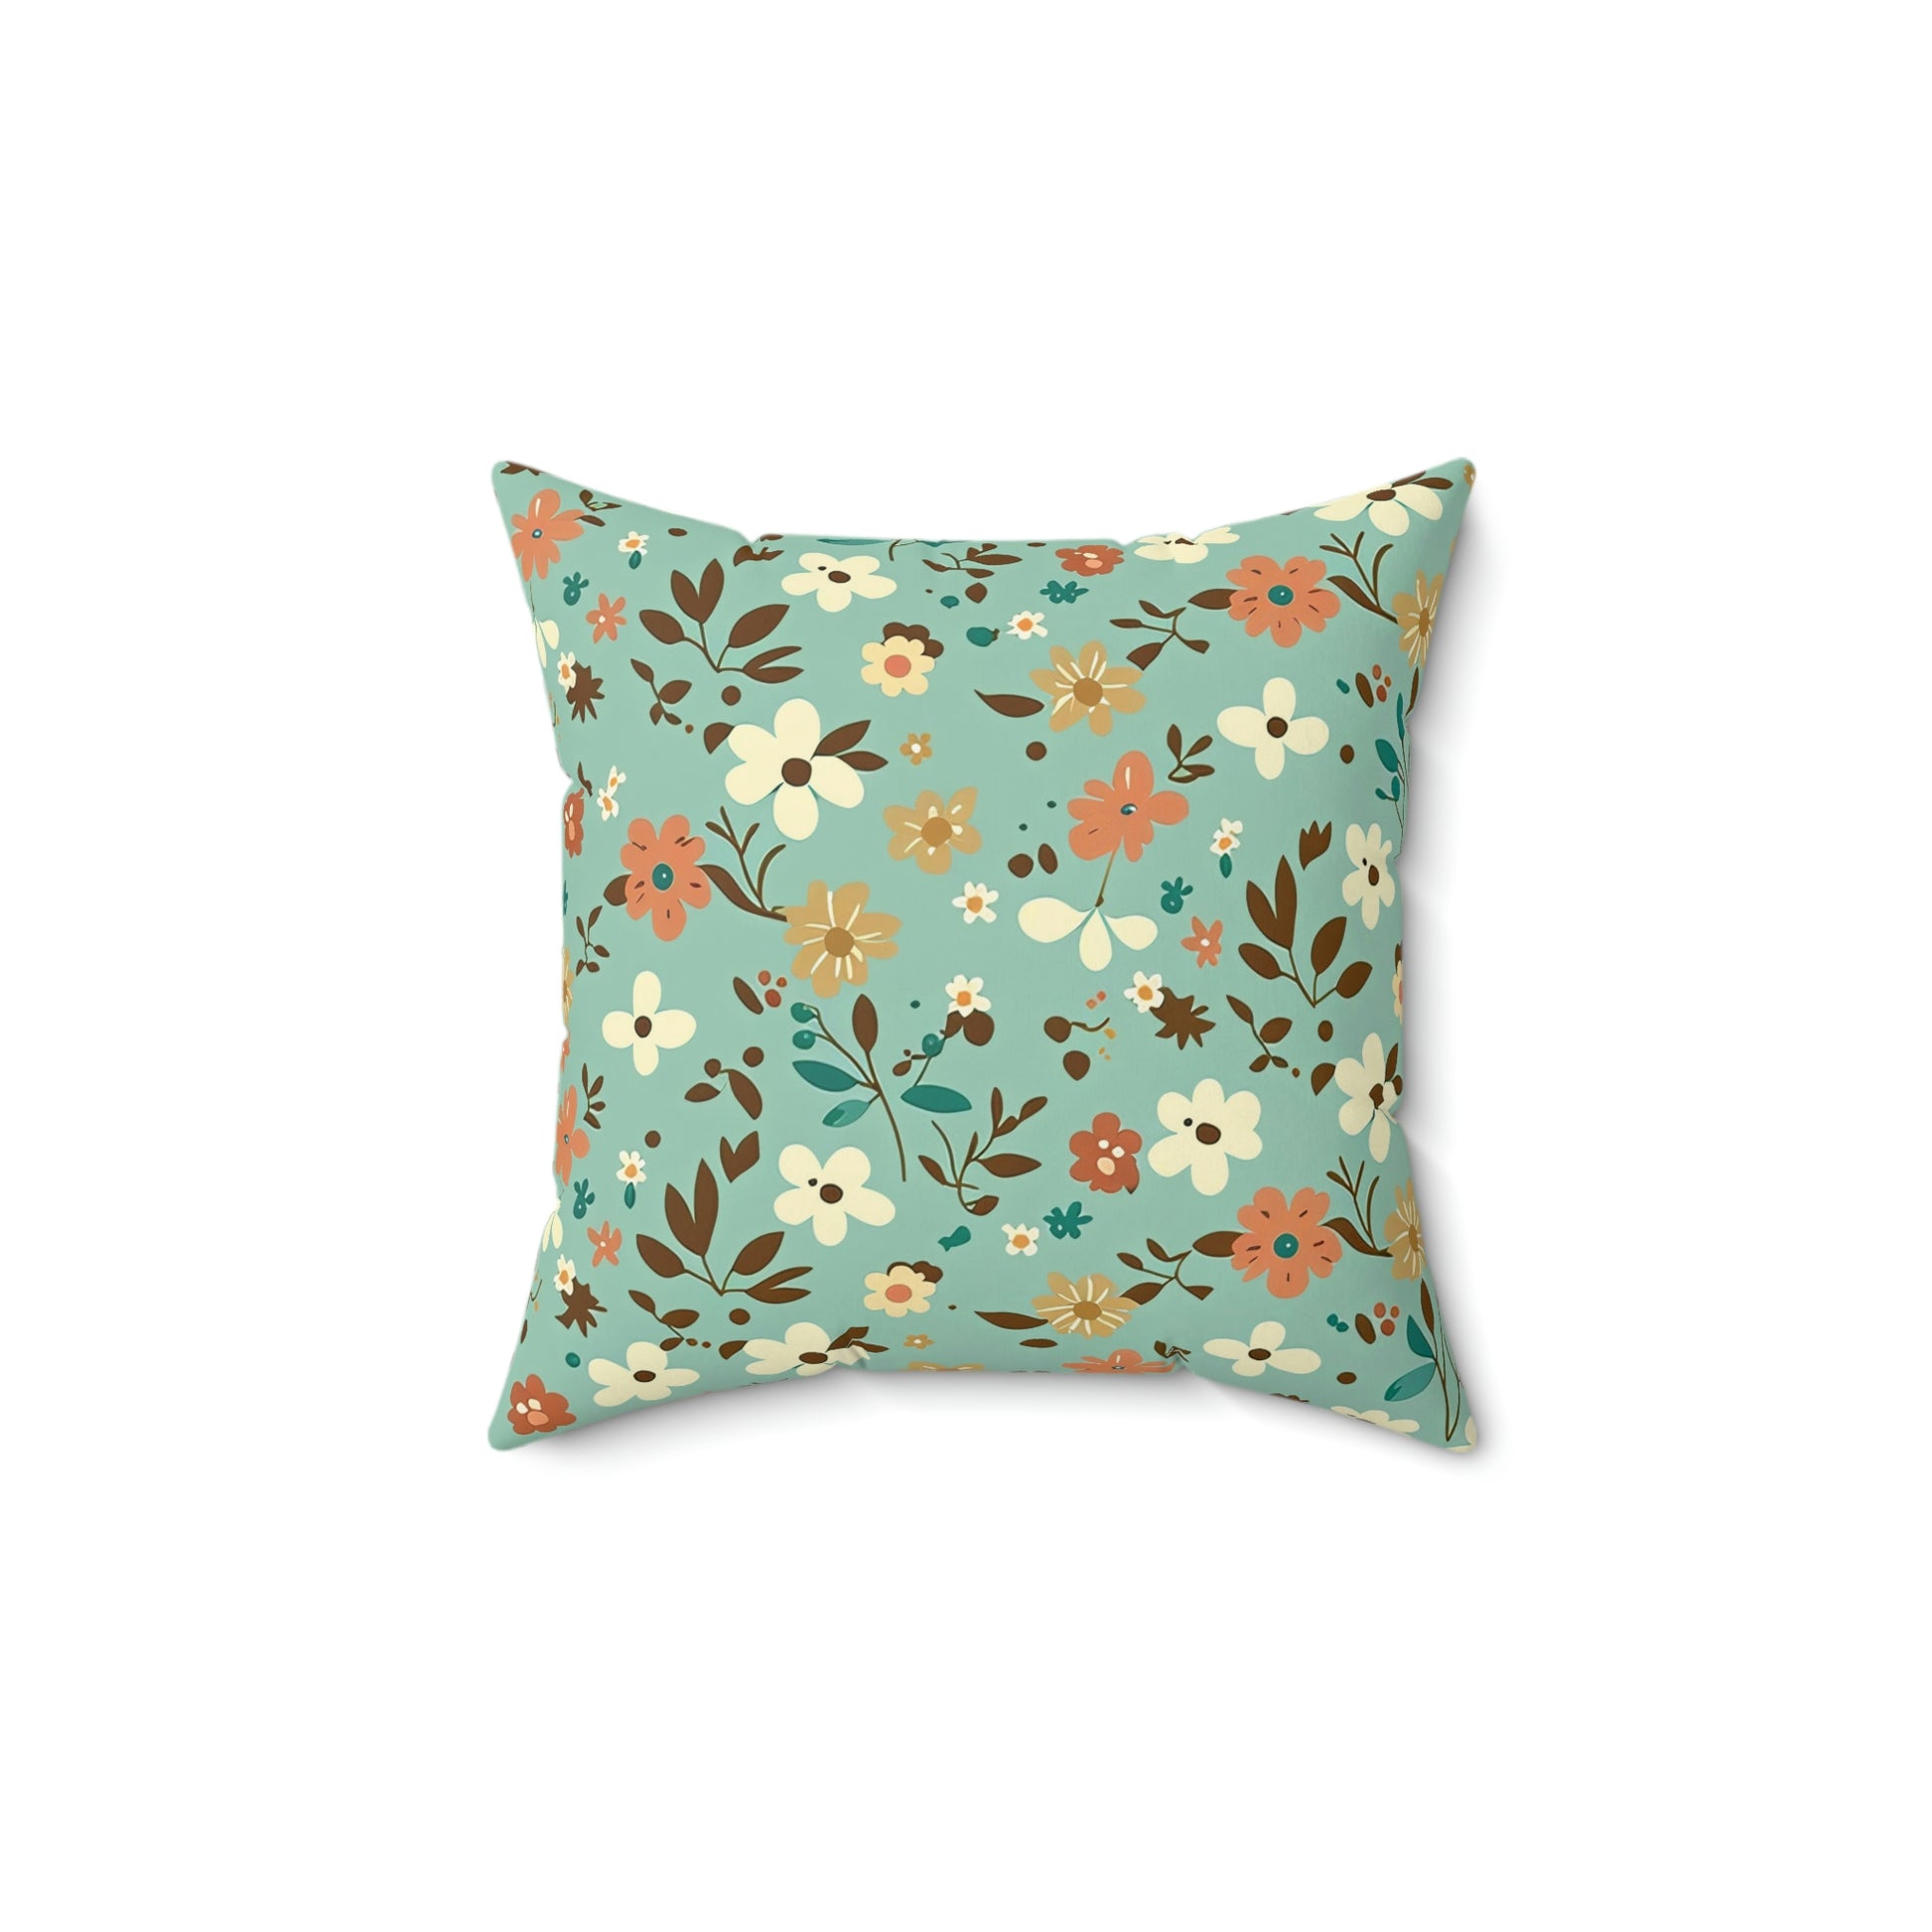 Boho Blue floral accent throw pillow on a couch, Boho Blue botanical couch pillow on a chair, Boho Blue floral pattern pillow on a lounger, Boho Blue spring garden floral decorative pillow on a bed